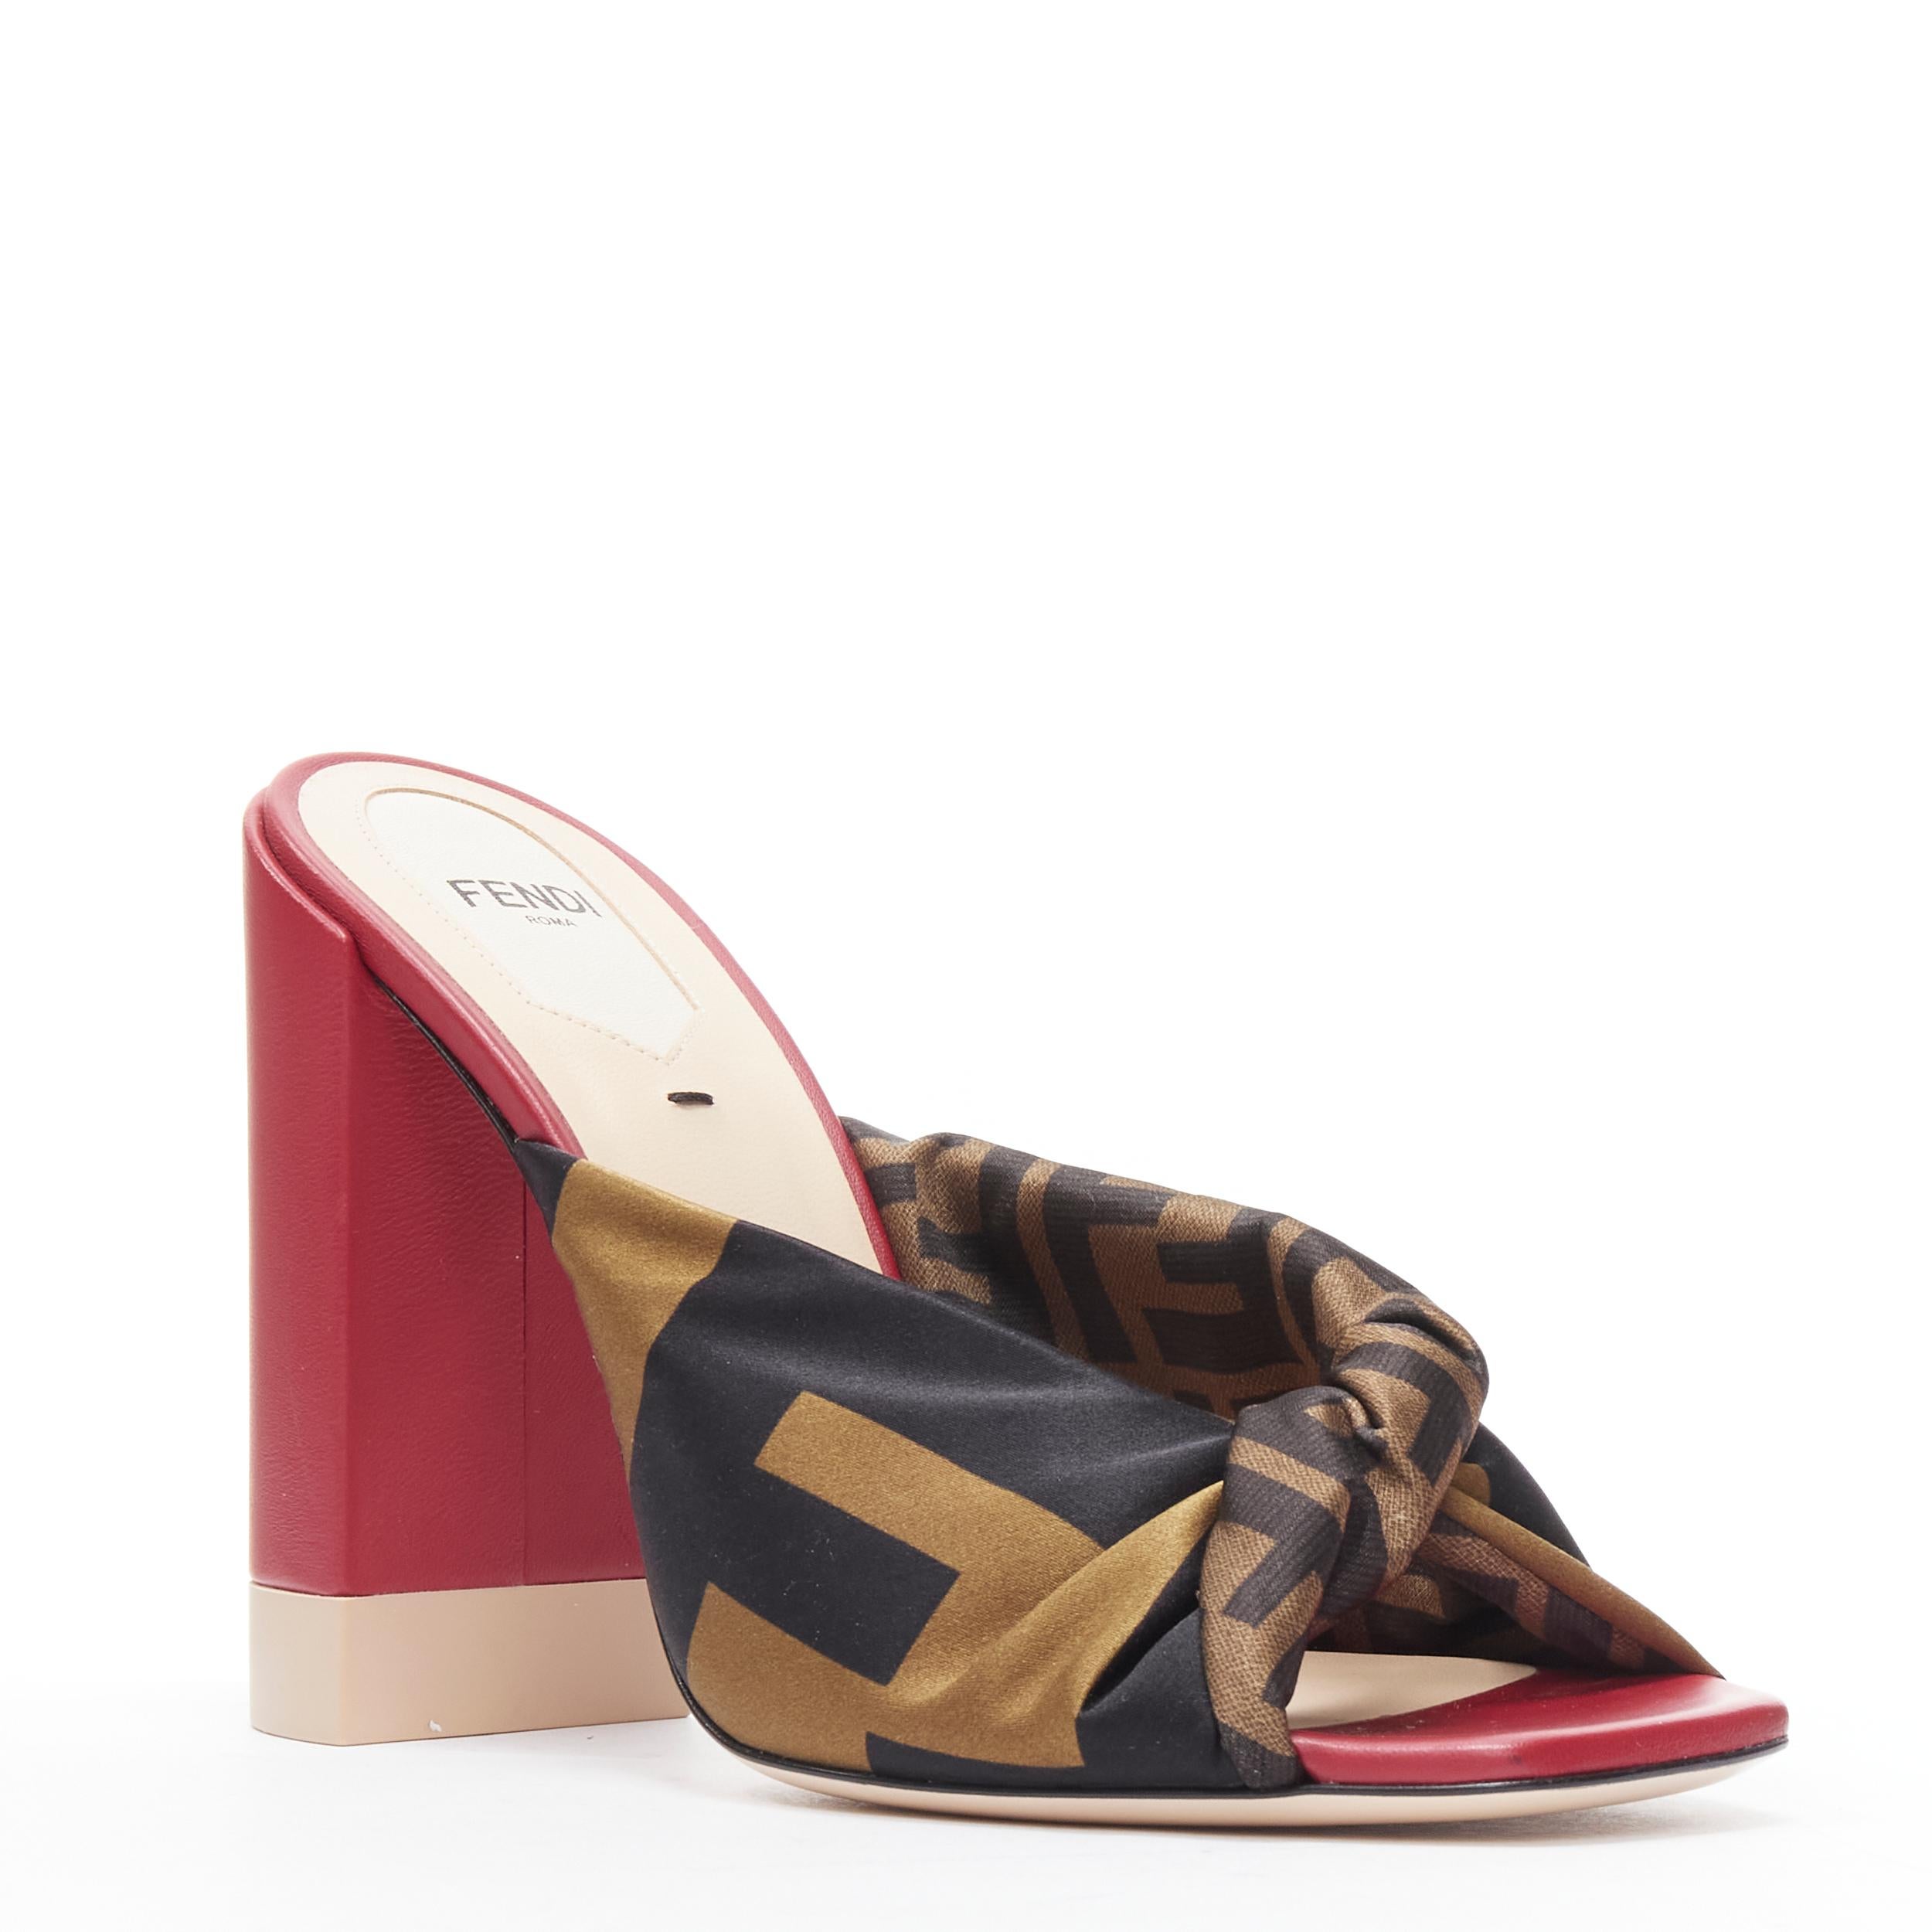 new FENDI Silk Sabot Zucca FF monogram twist red block heel mule EU38 
Reference: TGAS/B01592 
Brand: Fendi 
Model: Silk sabot mule 
Material: Silk 
Color: Brown 
Extra Detail: Twist monogram silk Sabot. Block heel. 
Made in: Italy 

CONDITION: